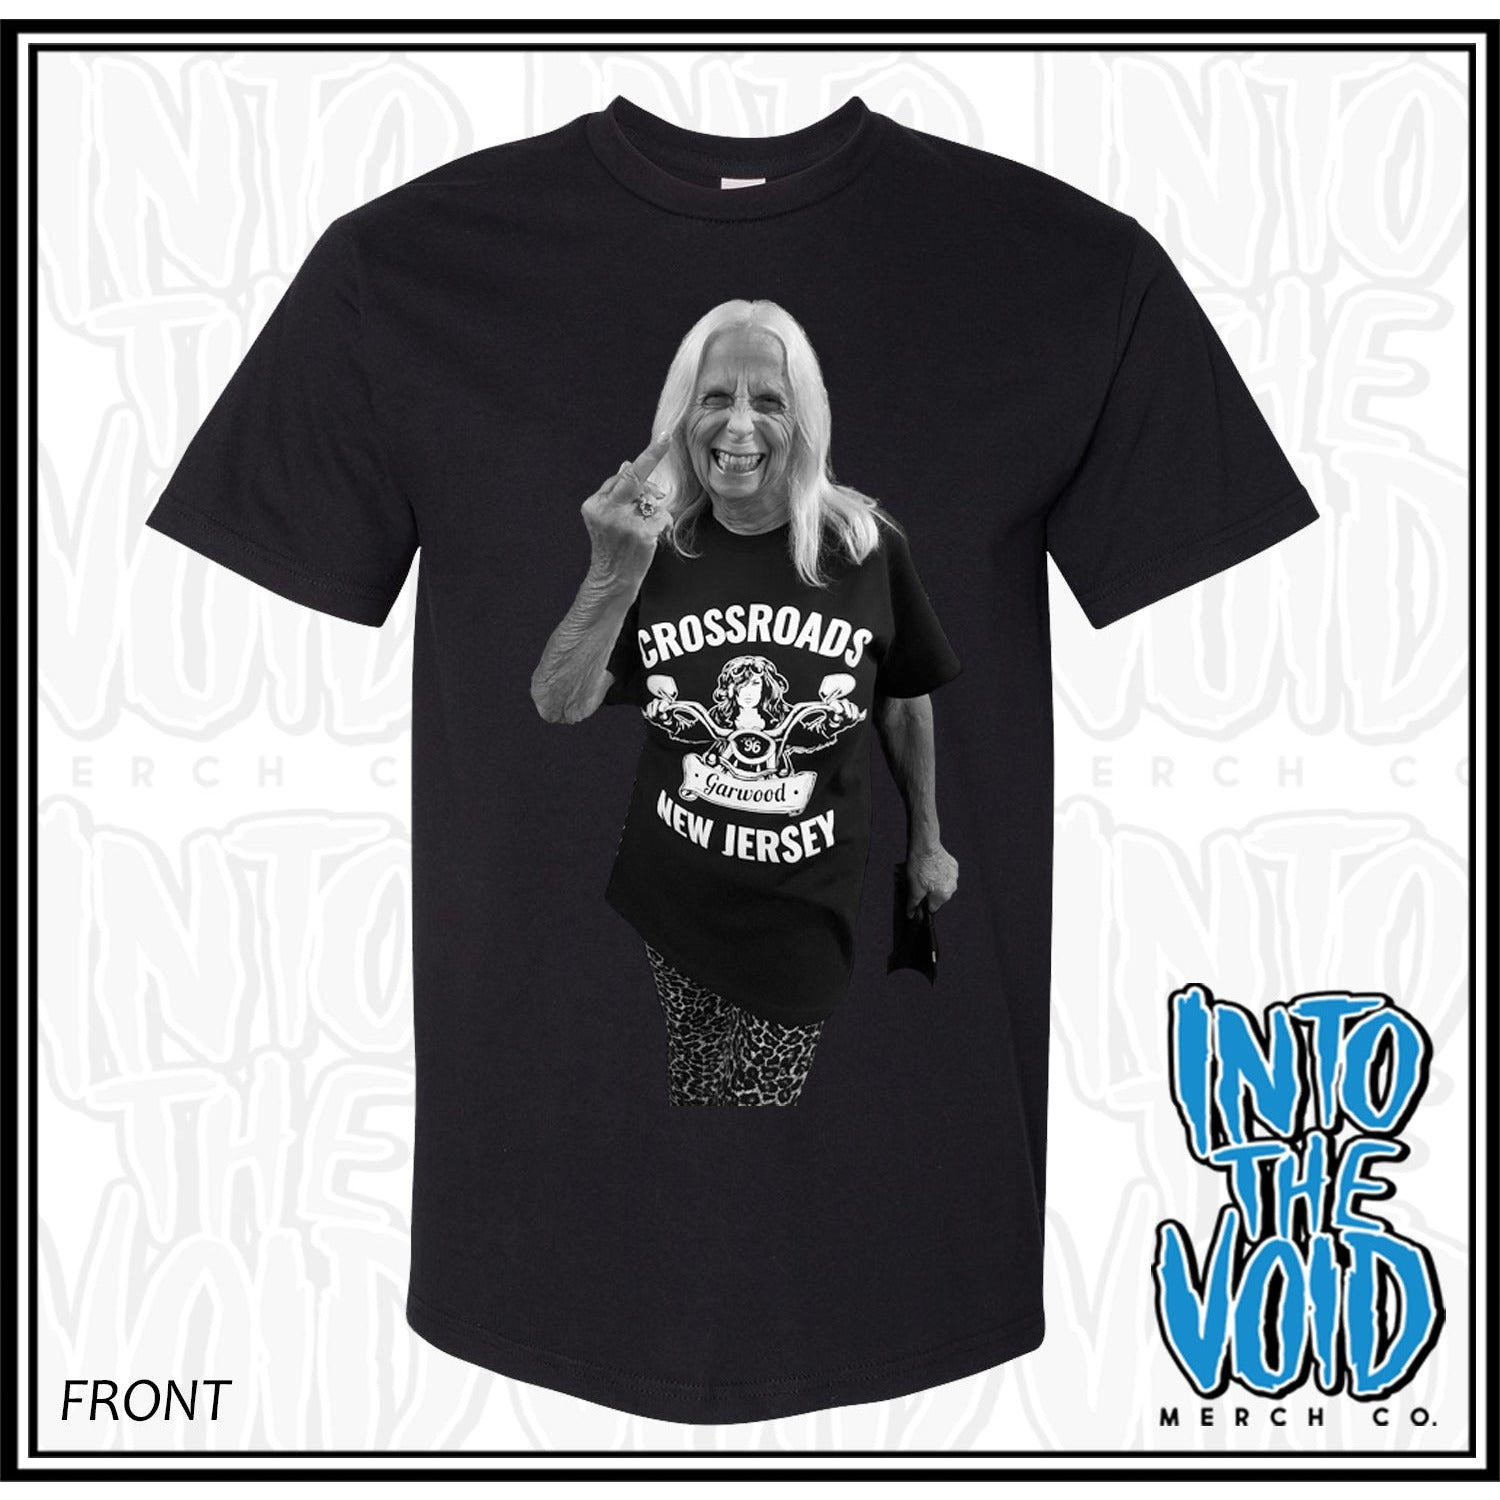 CROSSROADS - RONNIE - Short Sleeve T-Shirt - INTO THE VOID Merch Co.